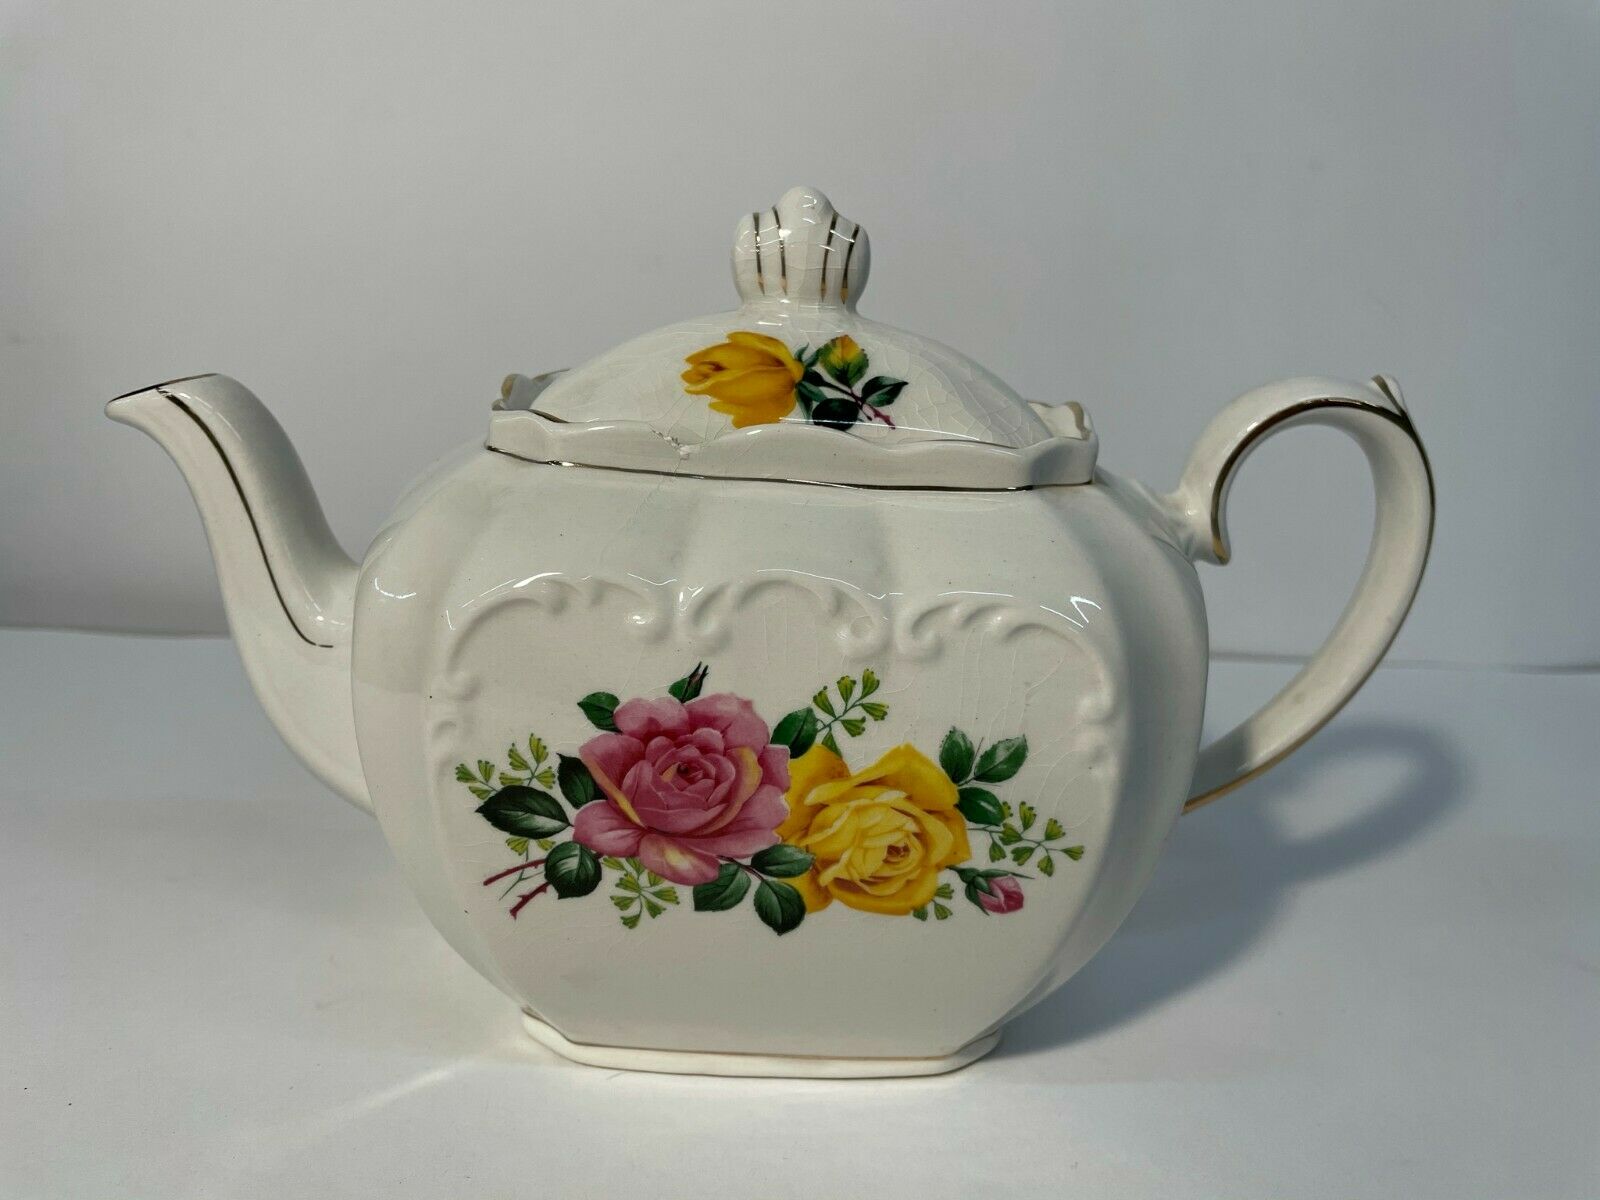 Vintage Sadler Teapot England White And Gold With Yellow And Pink Flowers